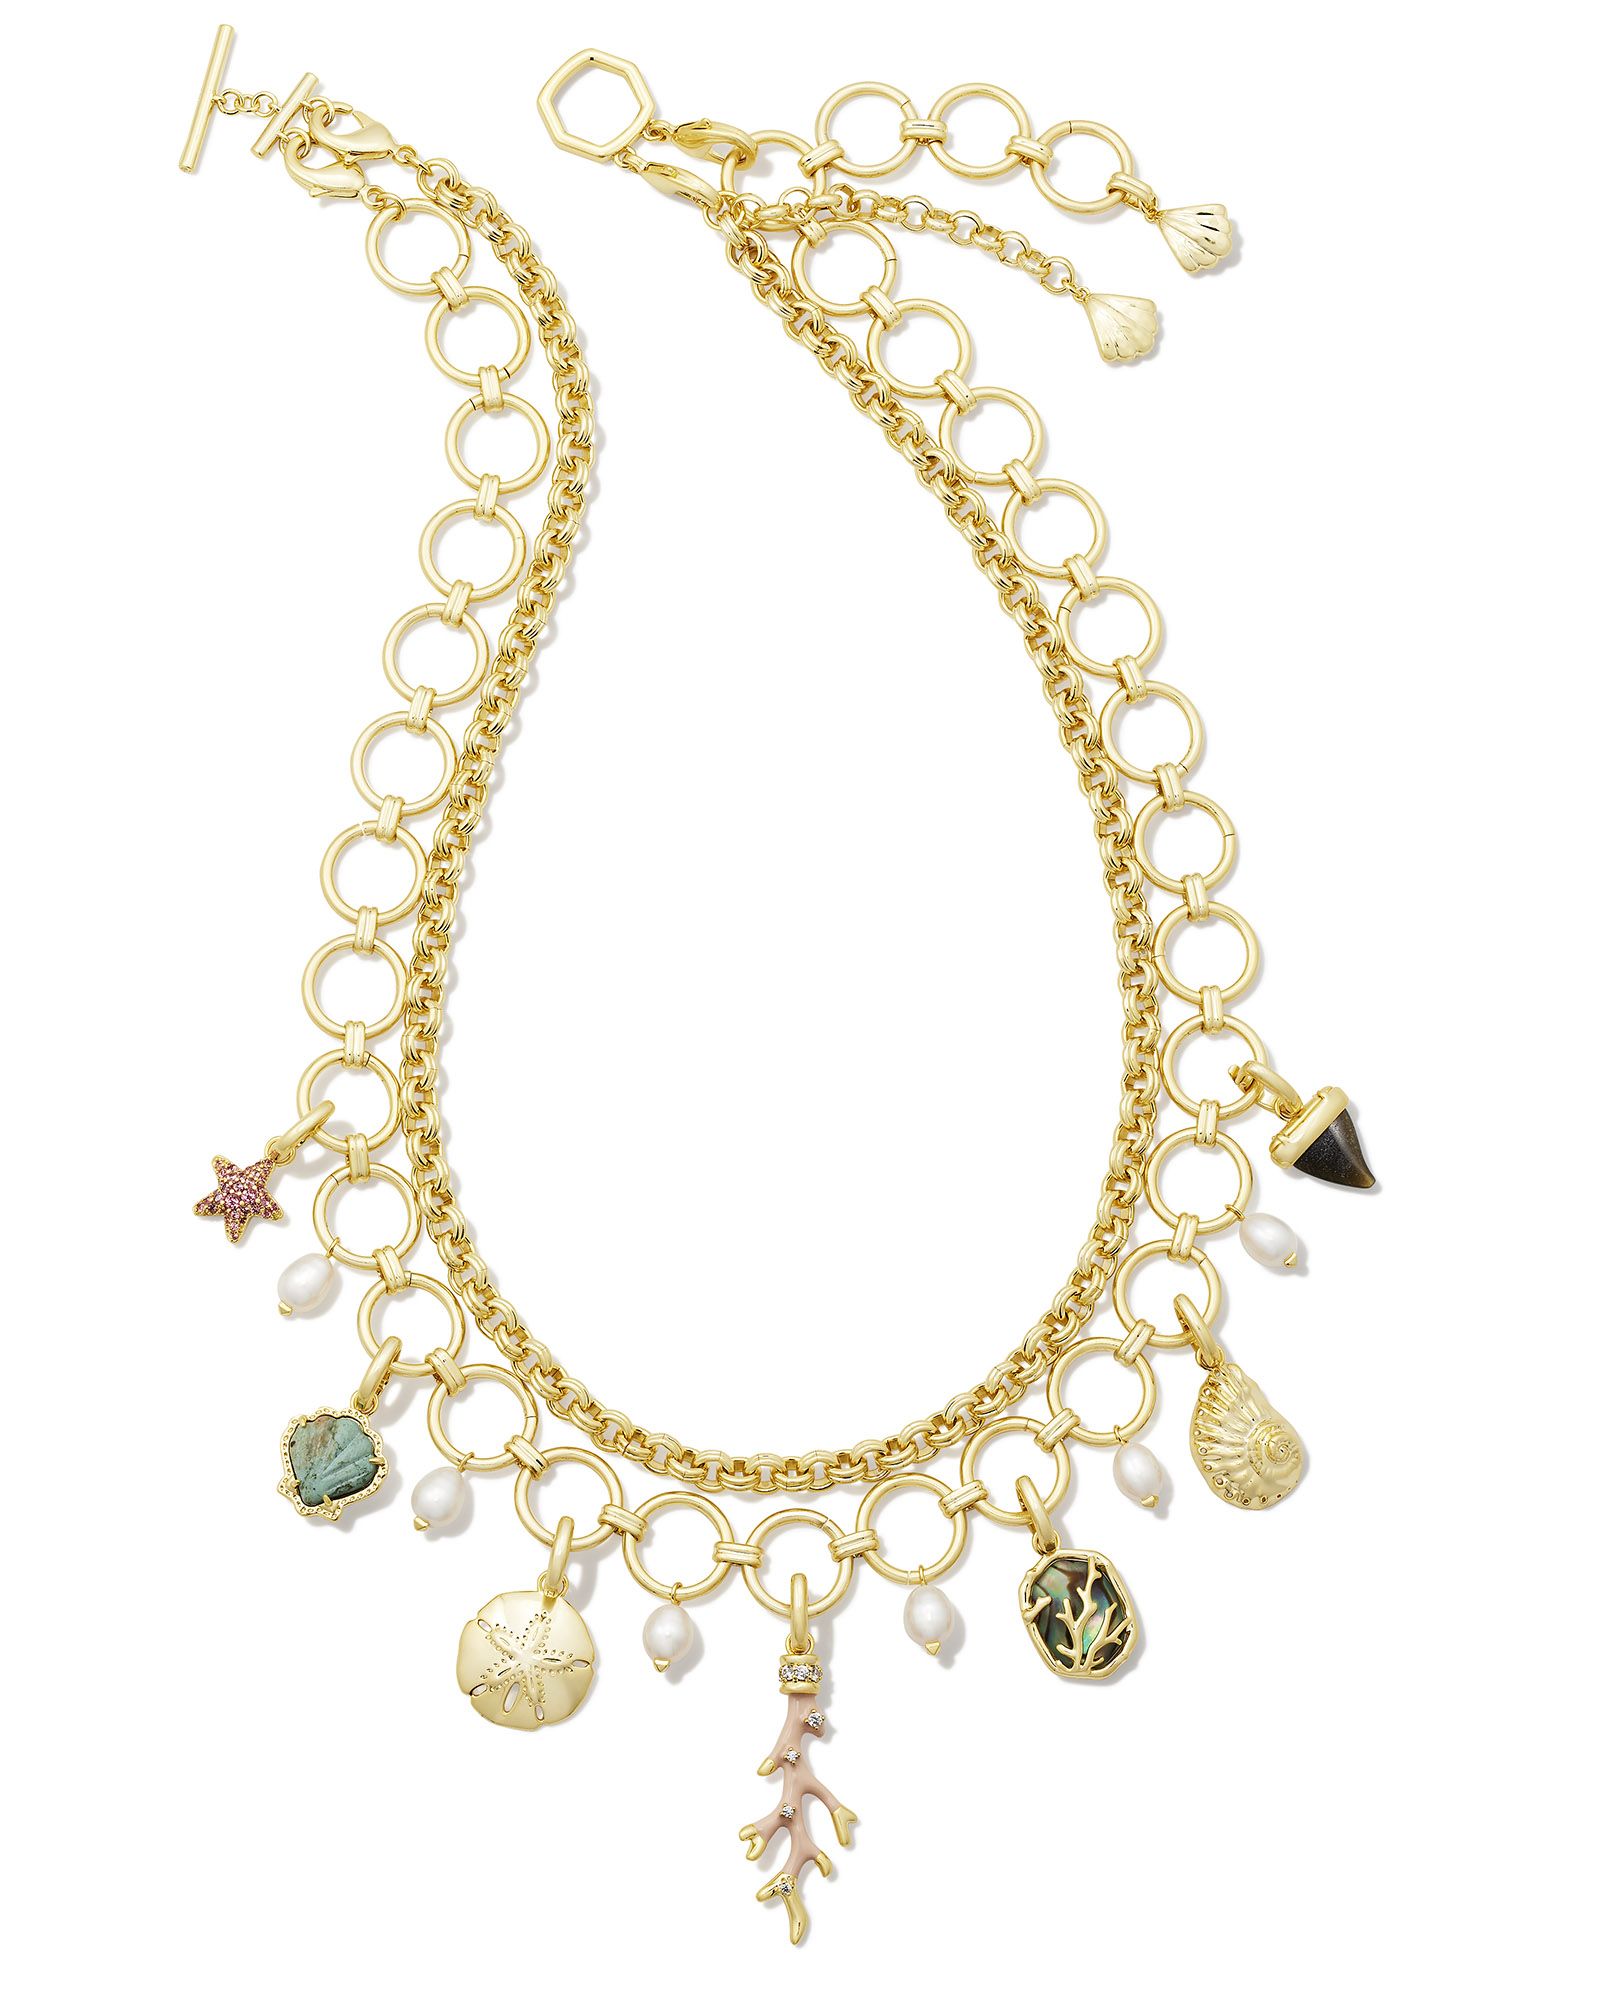 Brynne Convertible Gold Shell Charm Necklace in Multi Mix | Kendra Scott